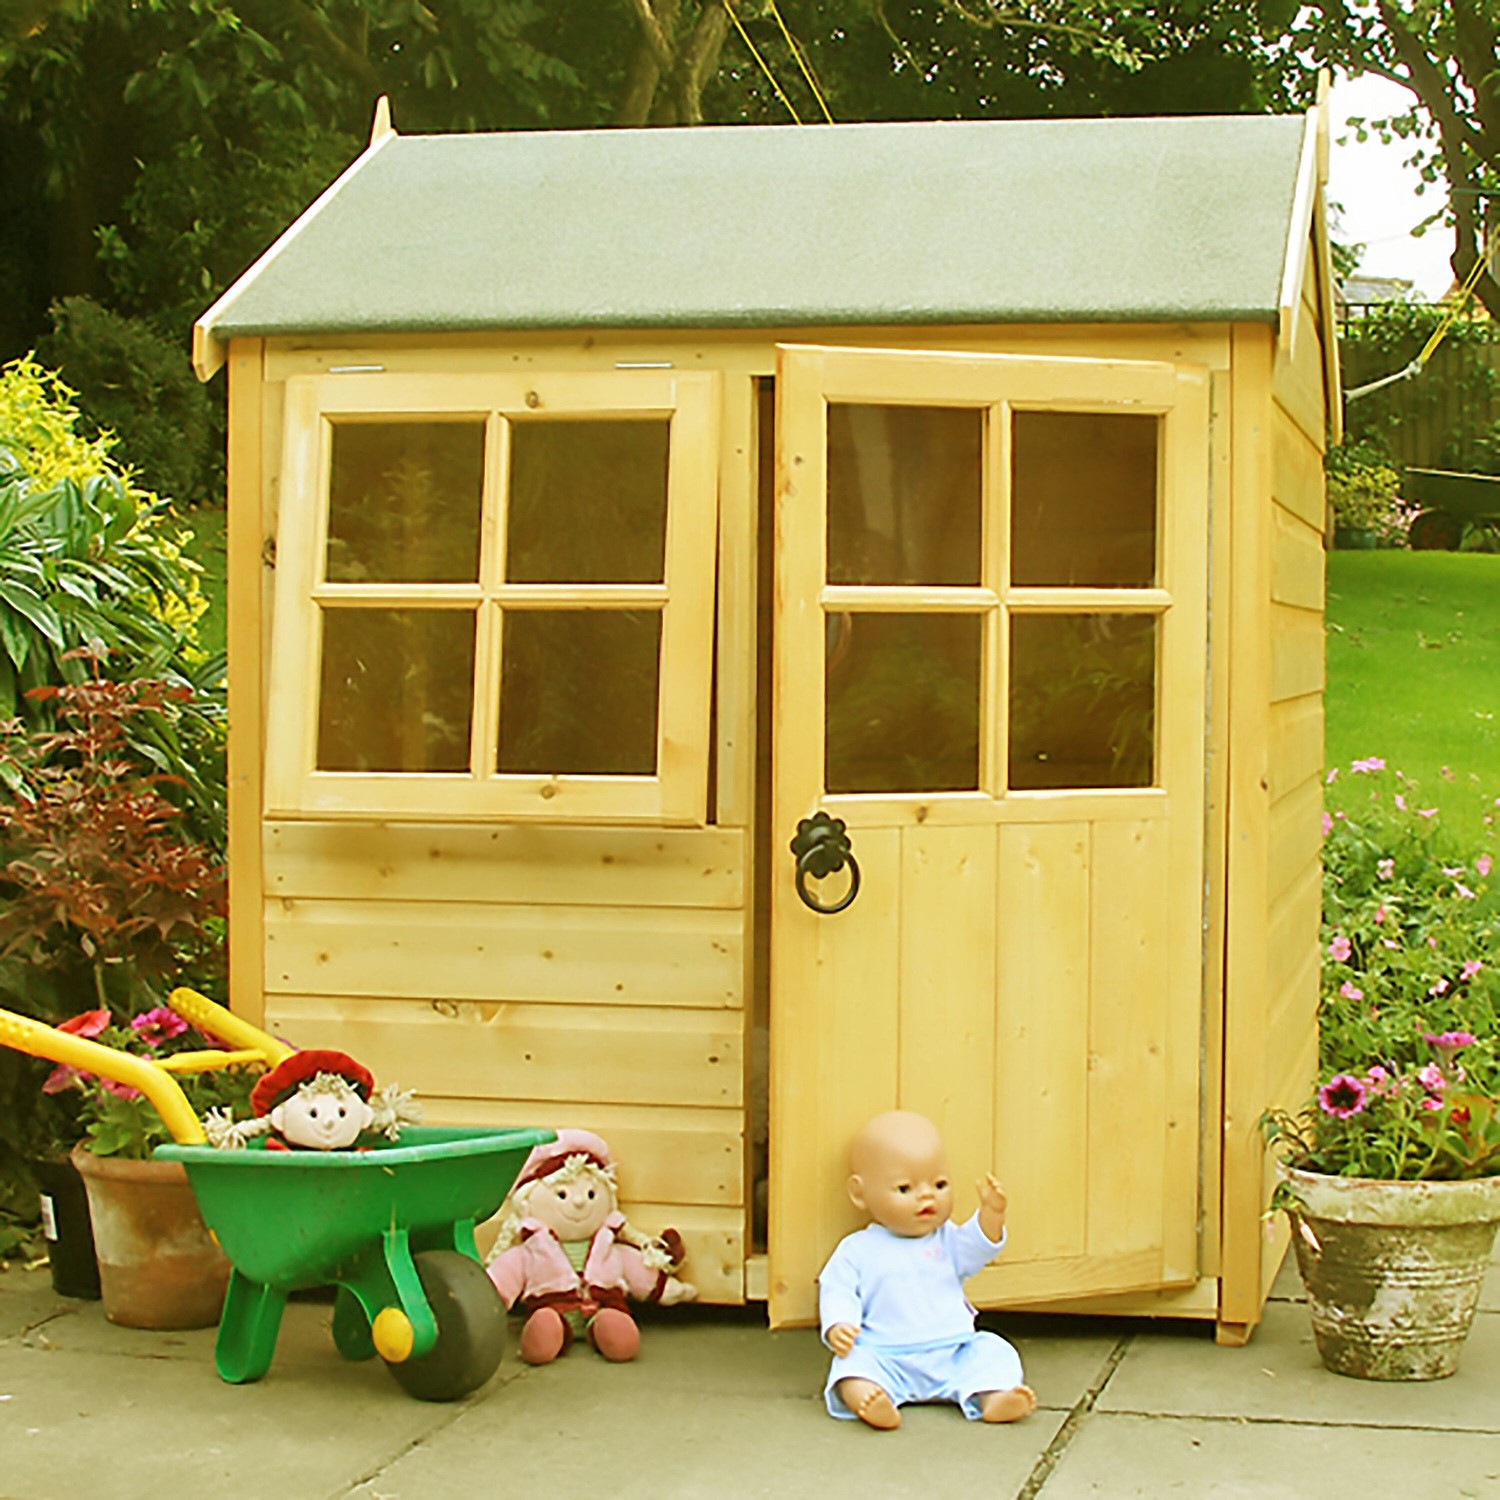 Photo of Timber garden playhouse - 4ftx4ft - shire